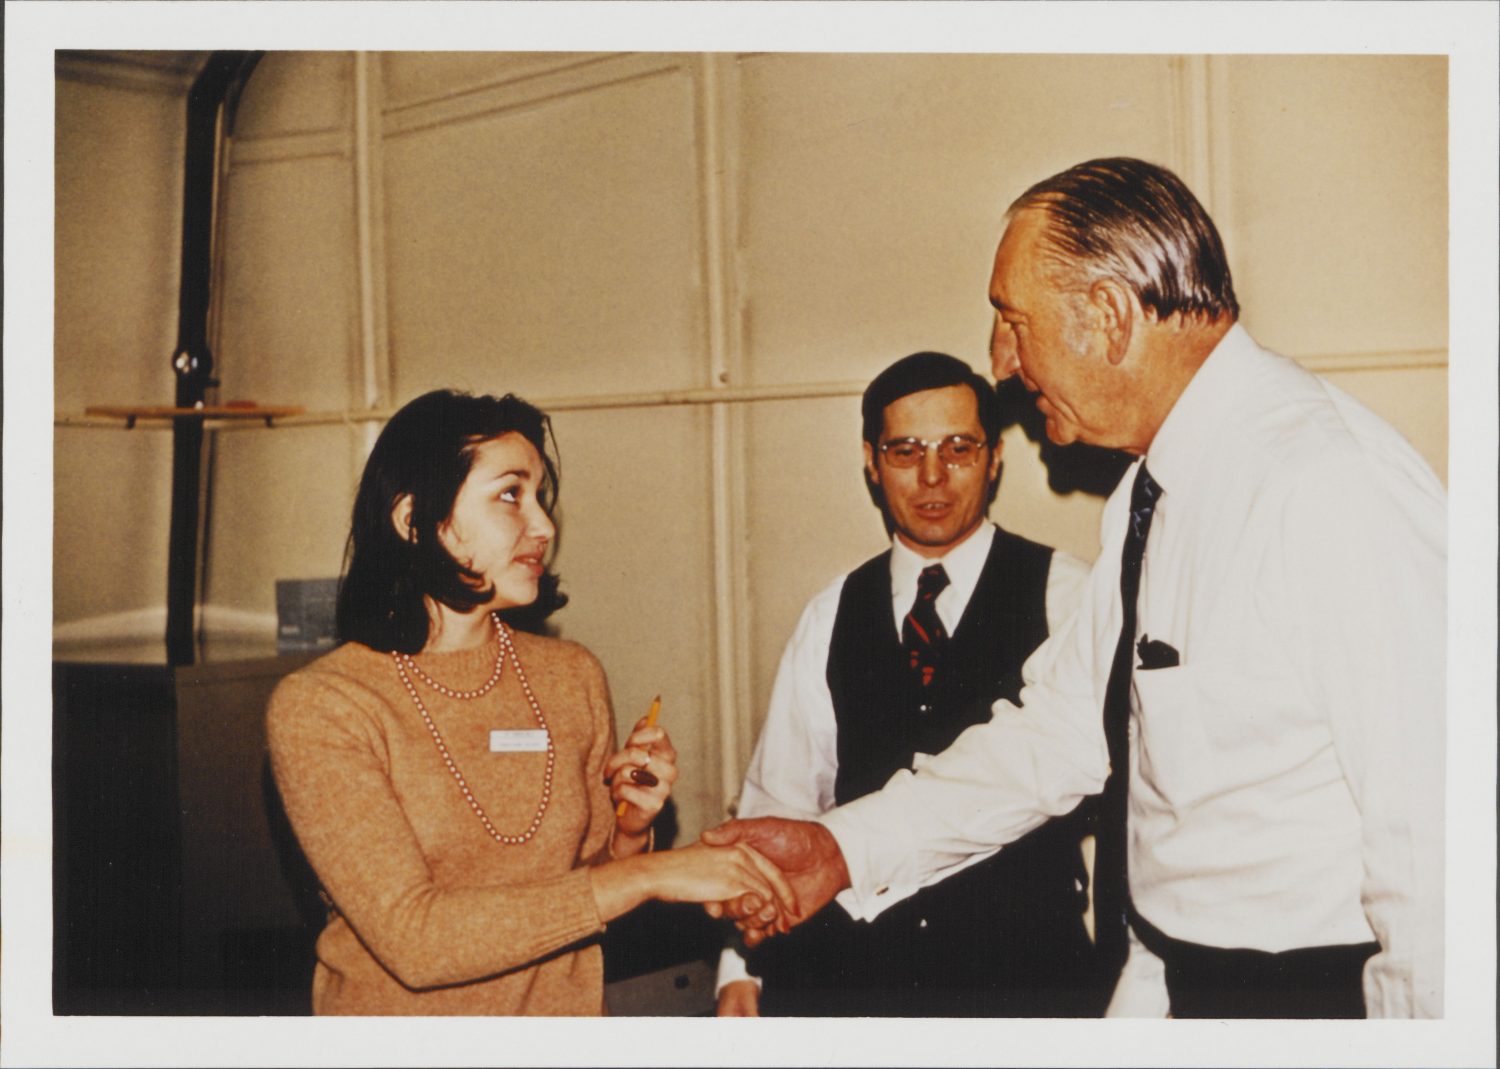 Dave Packard speaking with a female employee in the 1960s.